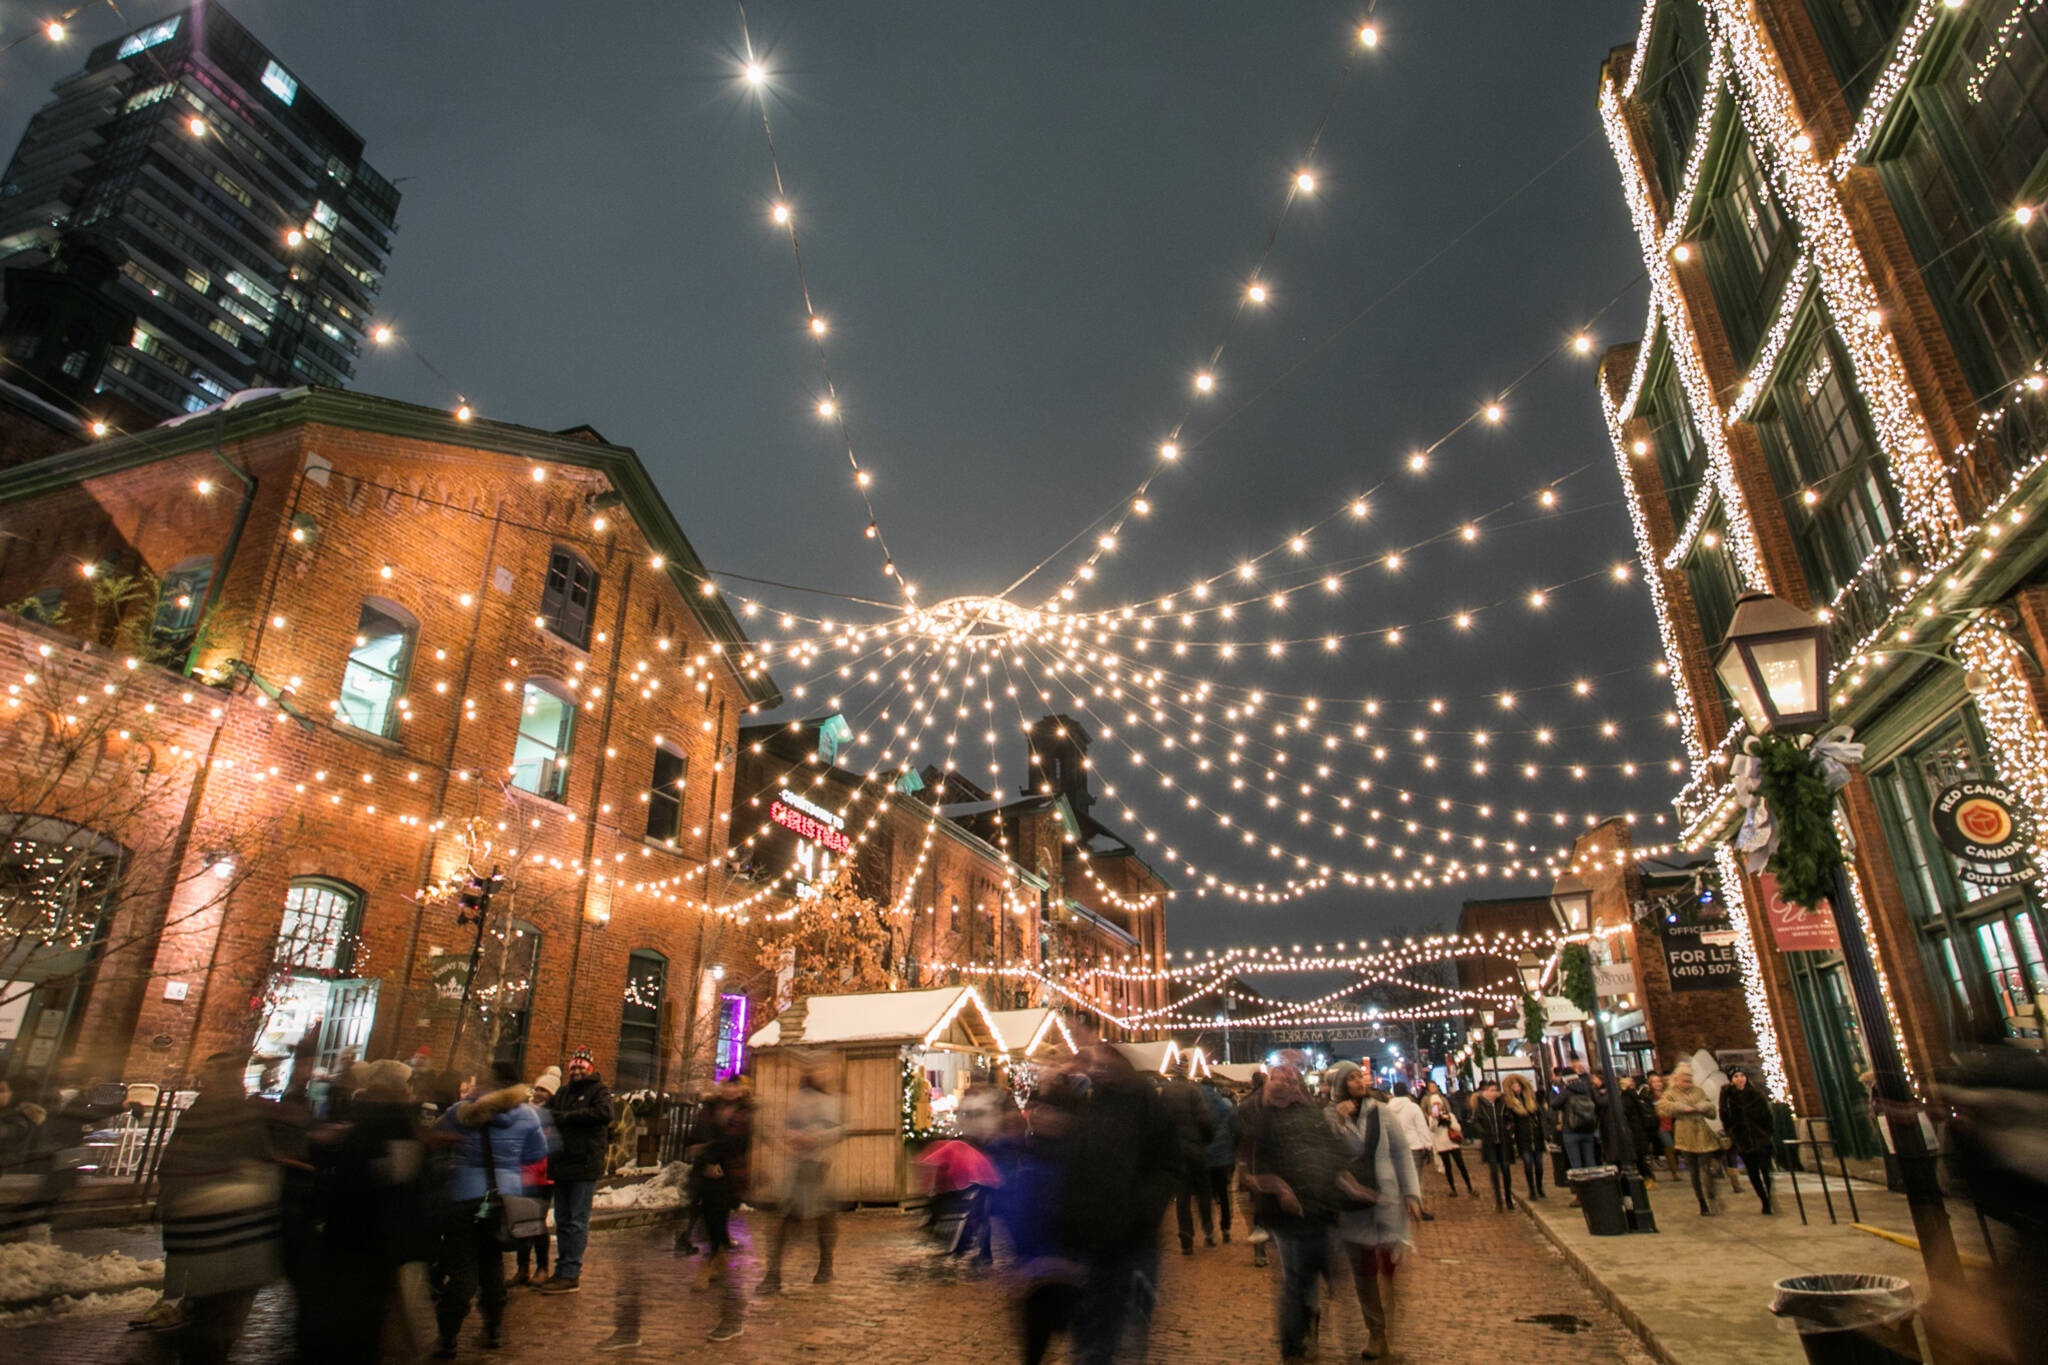 The Toronto Christmas Market is coming back this year with a new name